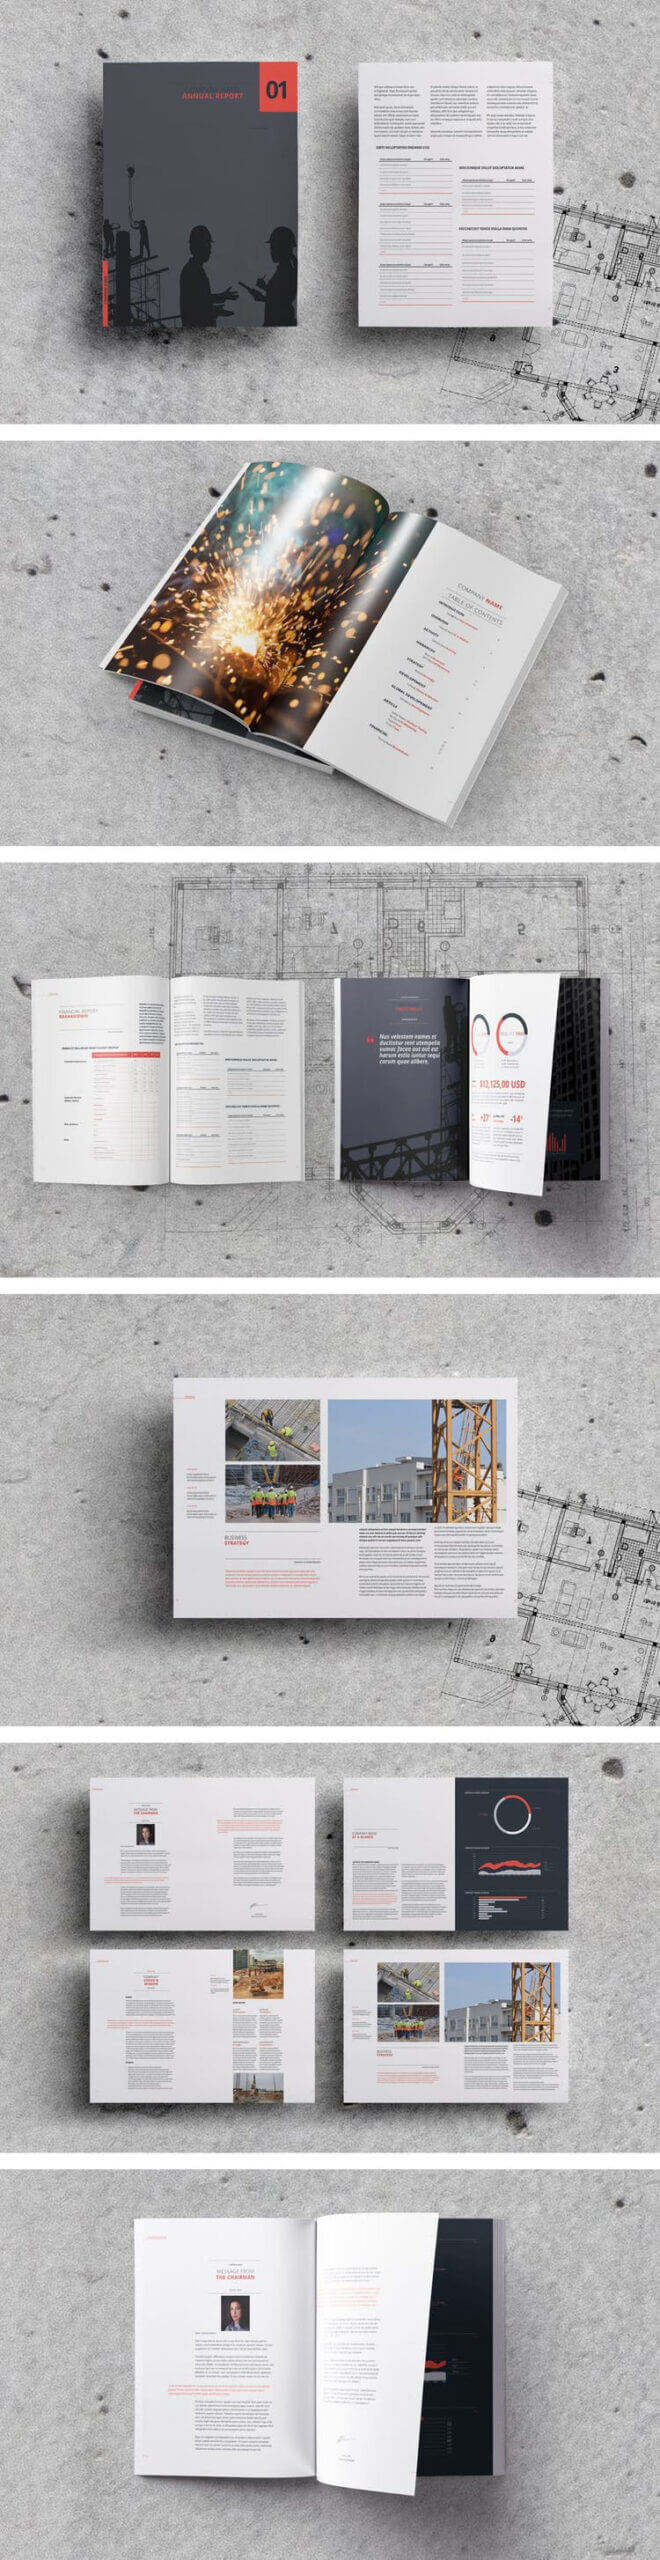 75 Fresh Indesign Templates And Where To Find More With Brochure Template Indesign Free Download